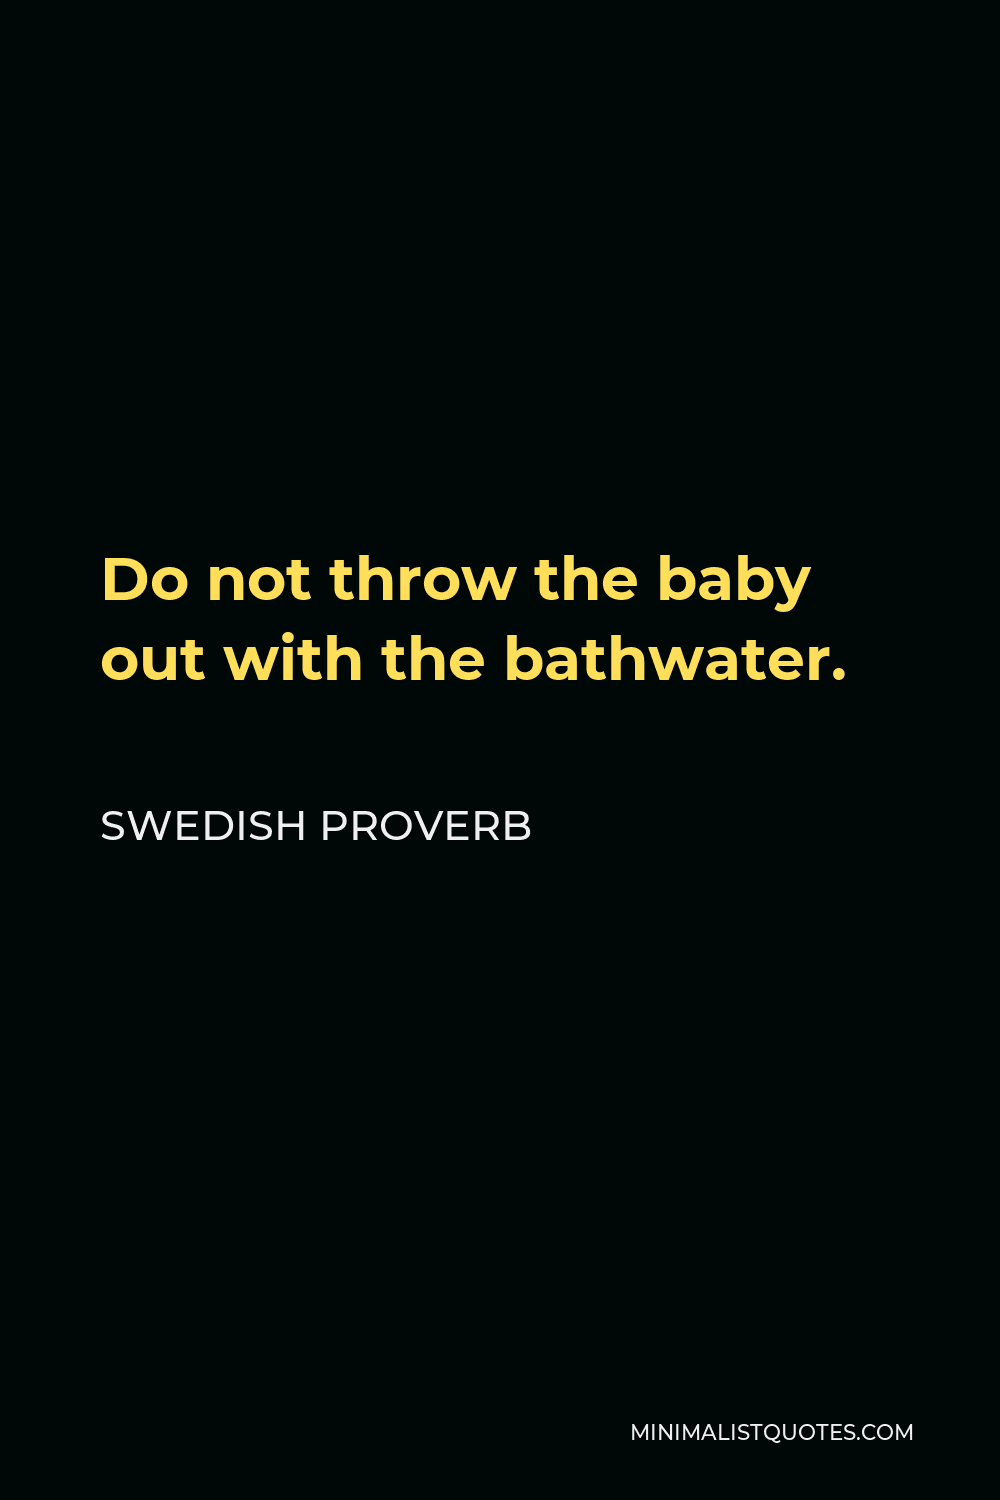 Swedish Proverb Quote - Do not throw the baby out with the bathwater.